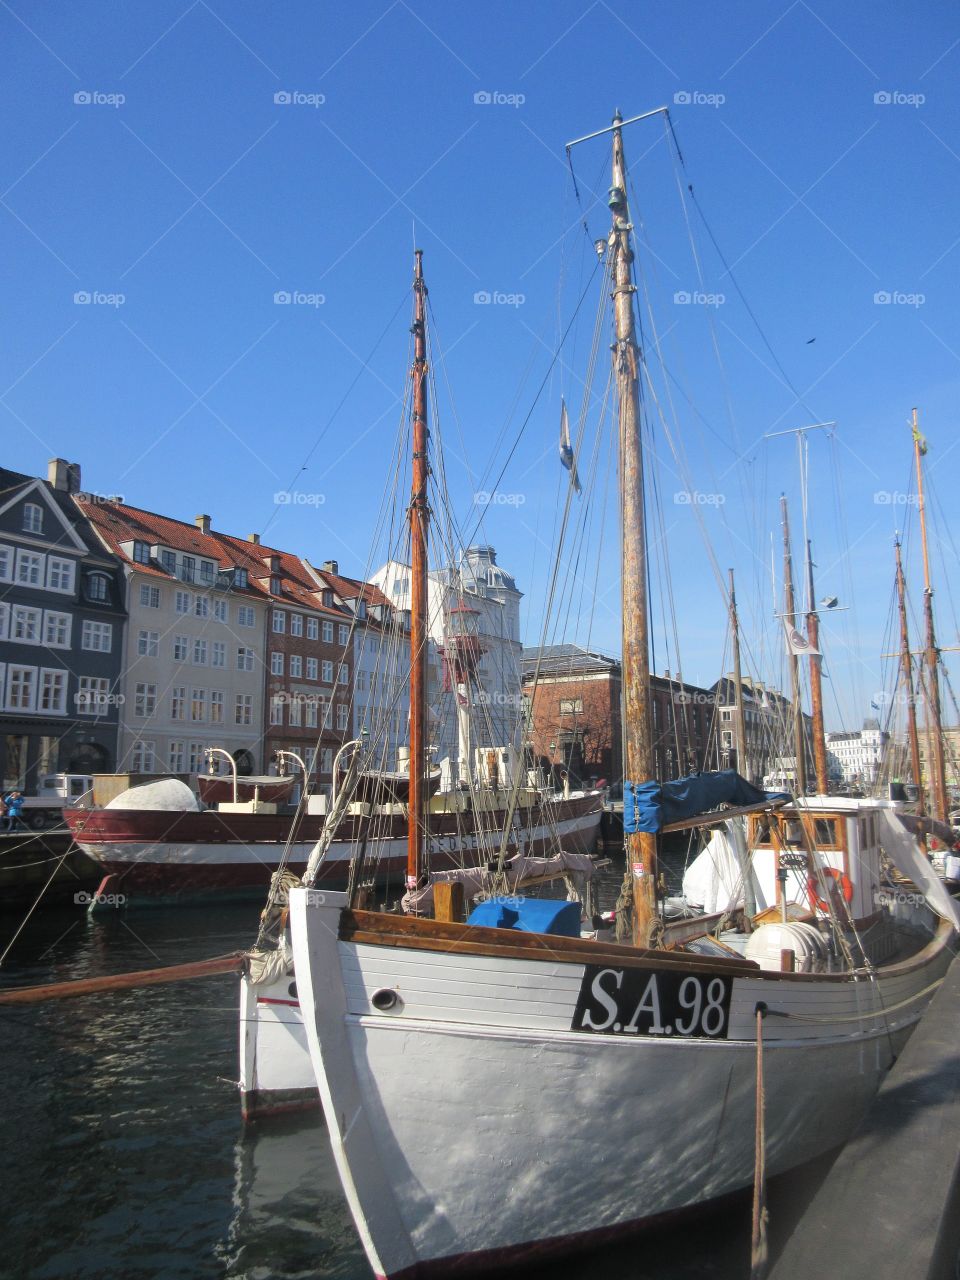 Boat in port in Denmark with clear, blue sky along with traditional buildings in the background. 